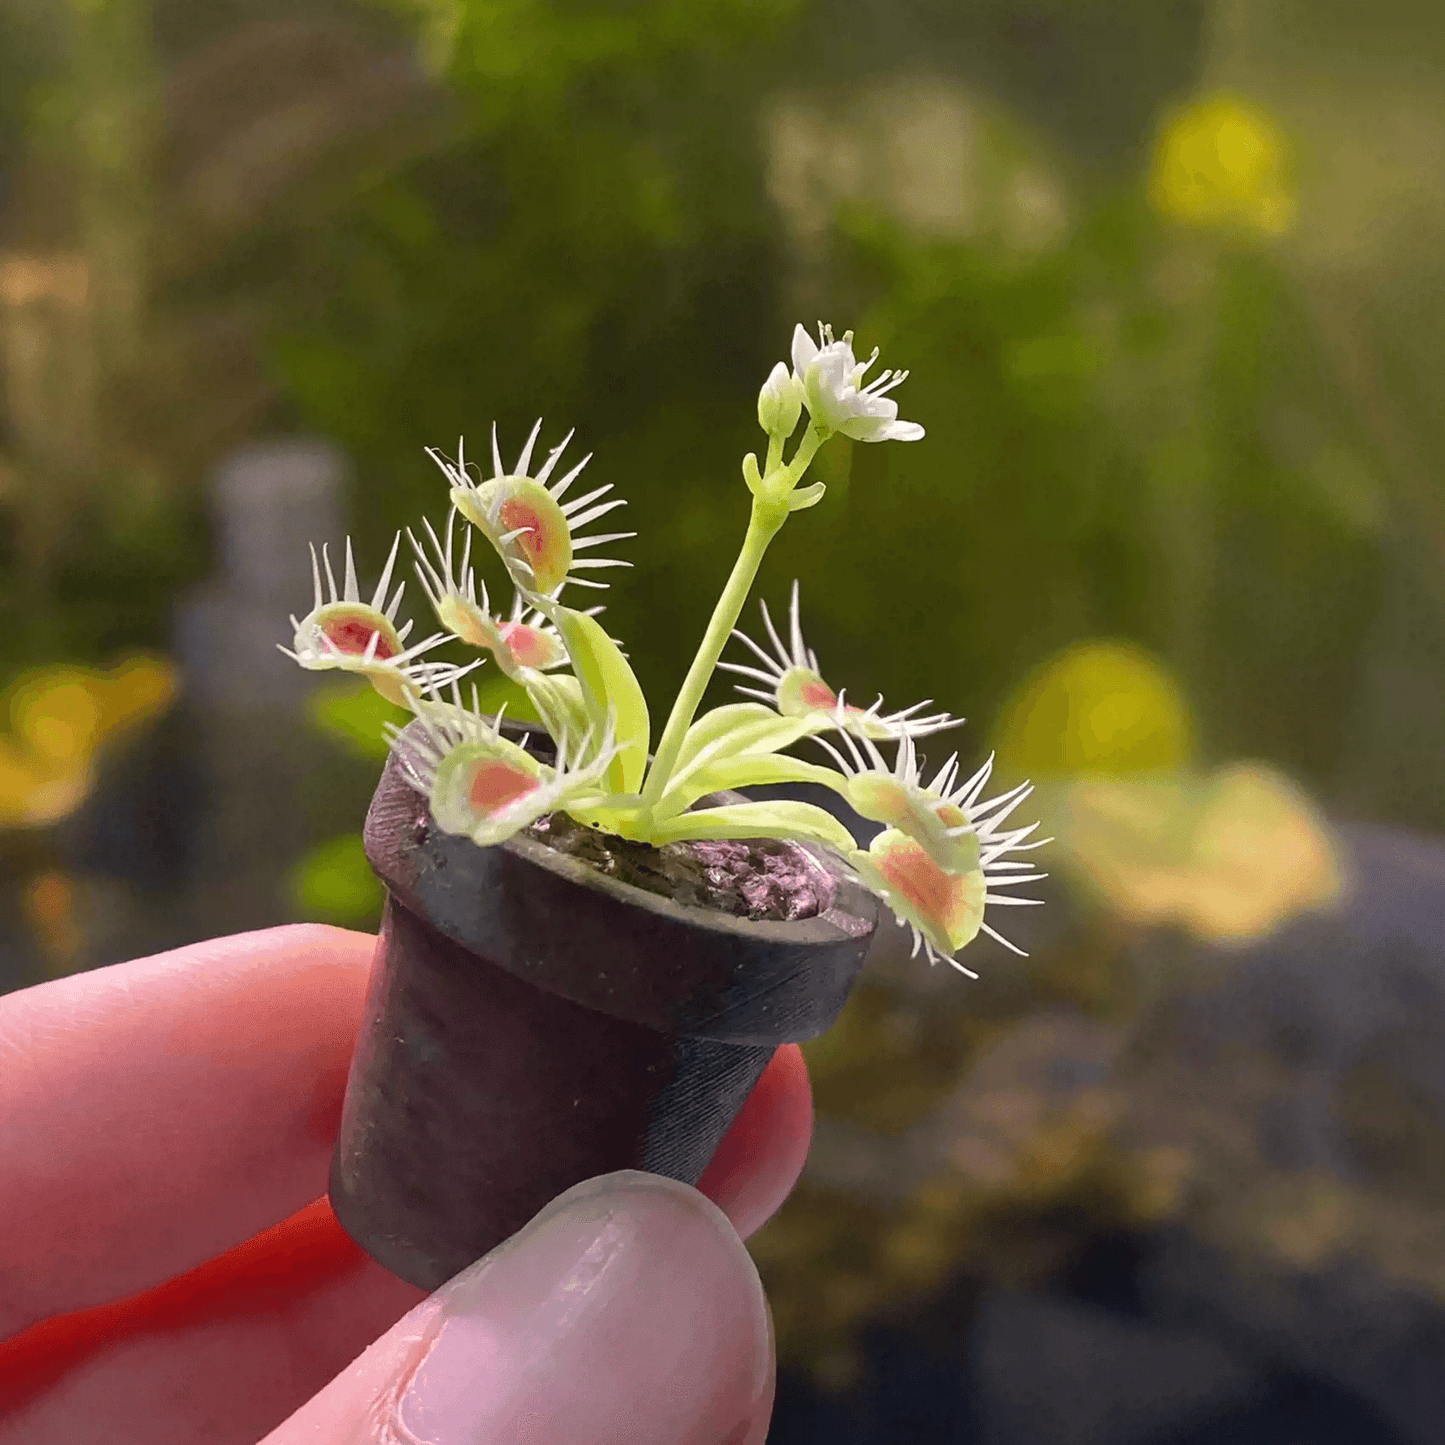 The Venus Flytrap (Dionaea muscipula) is a flowering plant best known for its carnivorous eating habits. The “trap” is made of two hinged lobes at the end of each leaf. Scale: 1:6; 1:12  Material: Handmade from Clay  Height: 4.5cm / 1.77in